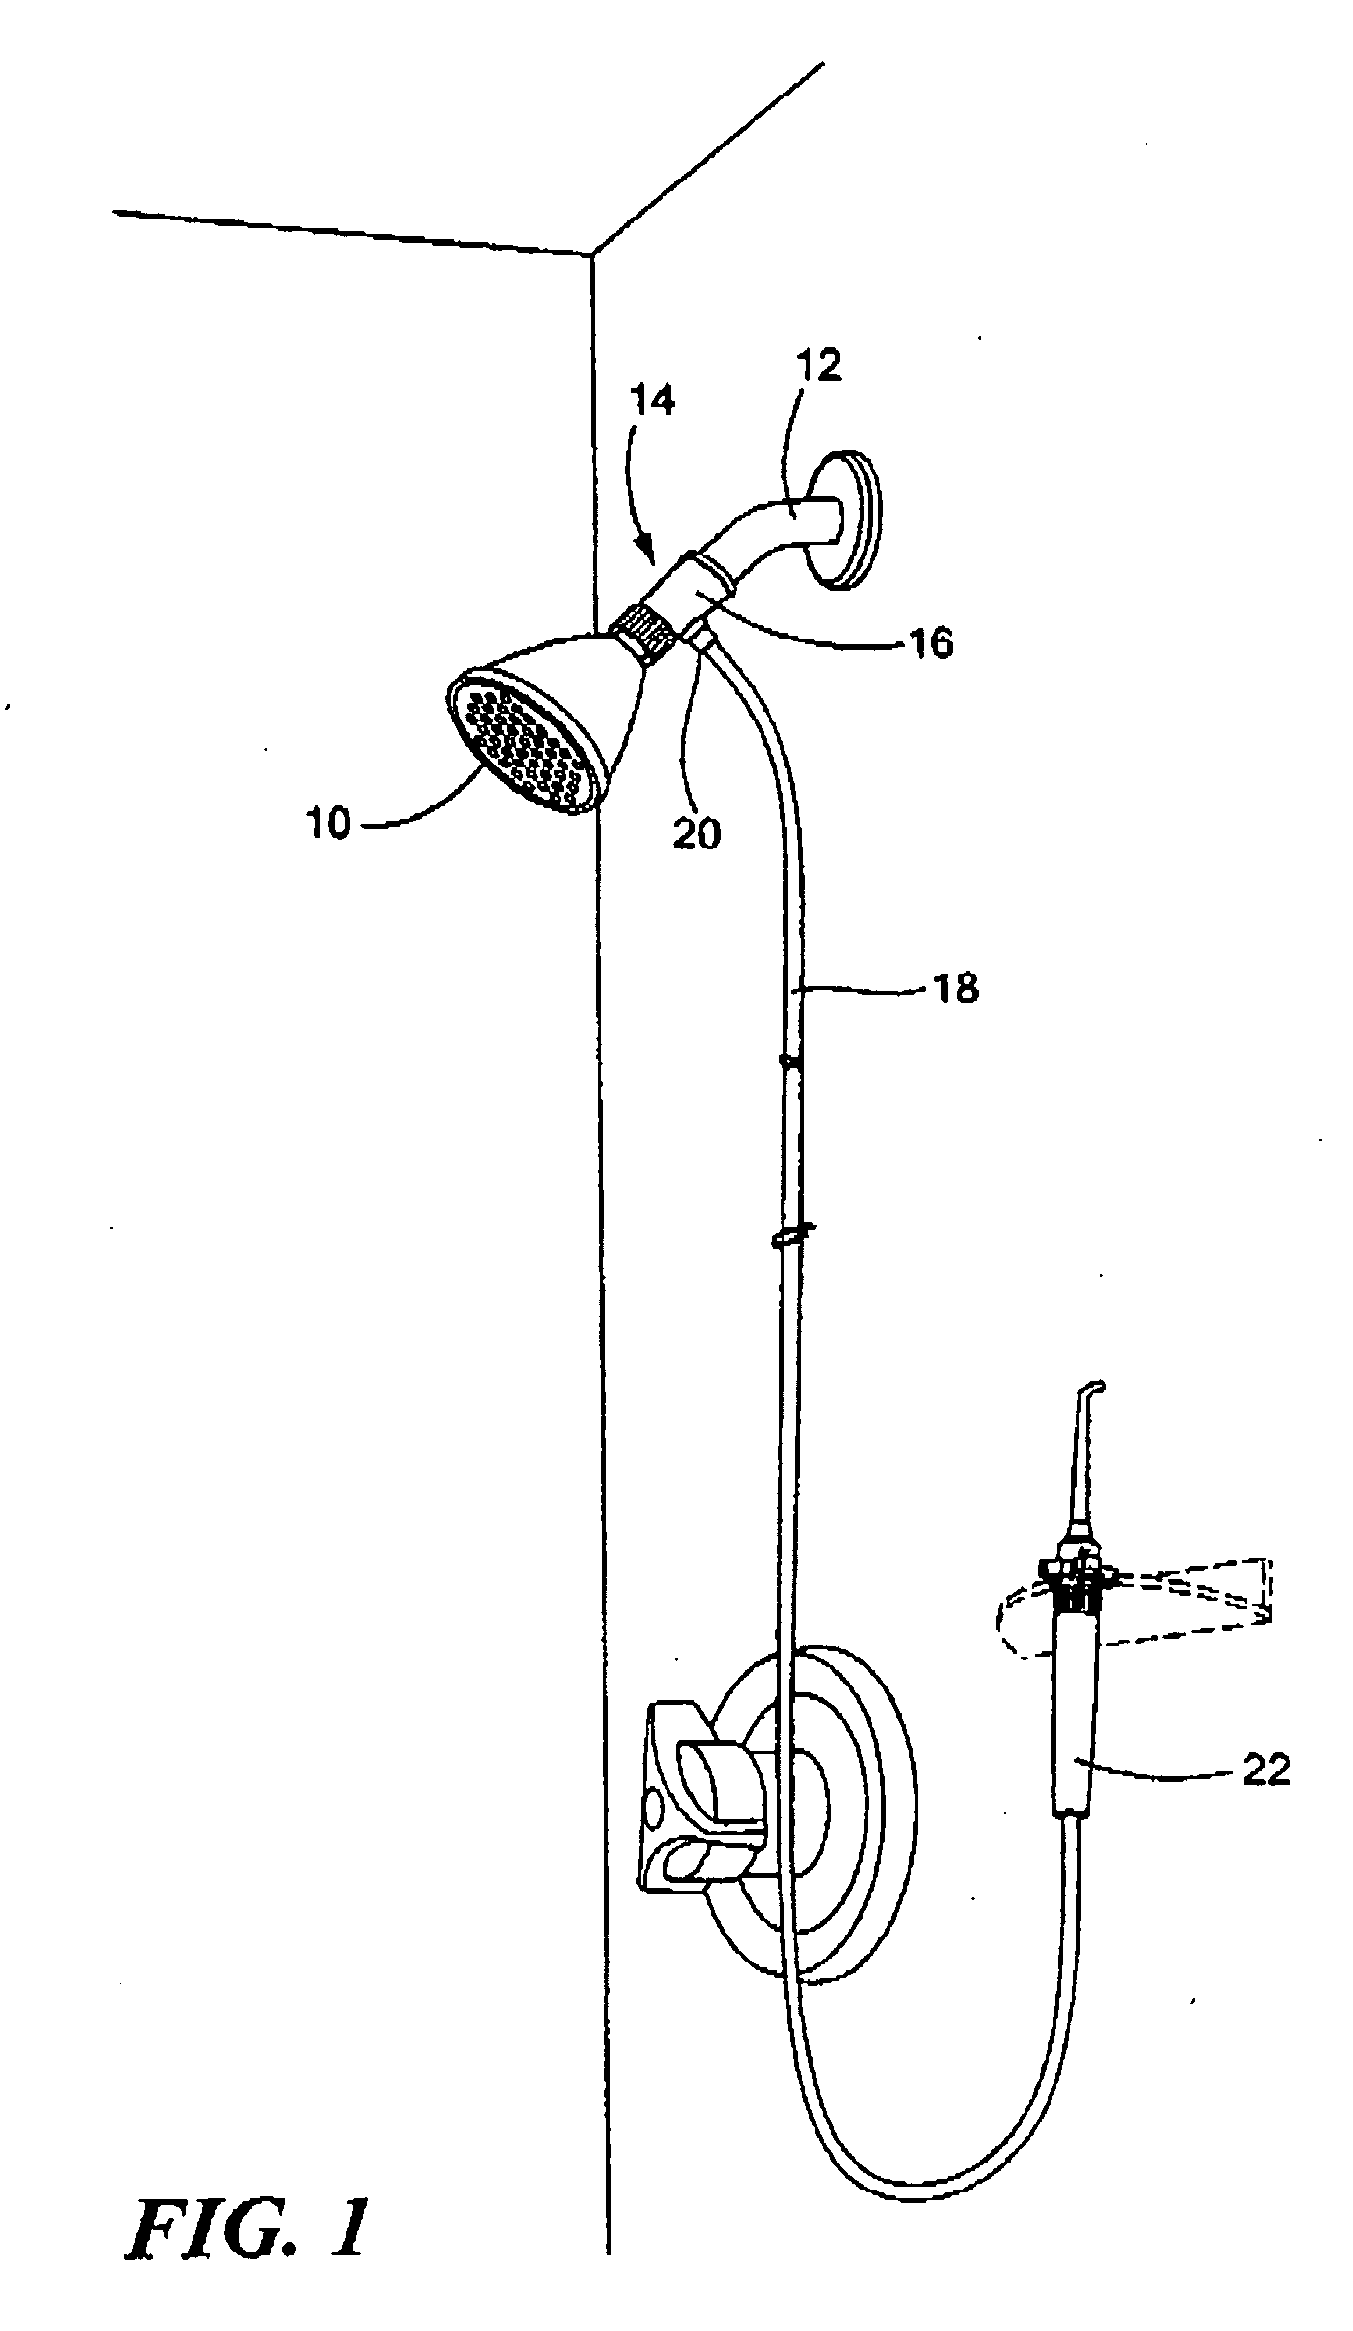 Shower head attachment with a pulsator used to clean teeth